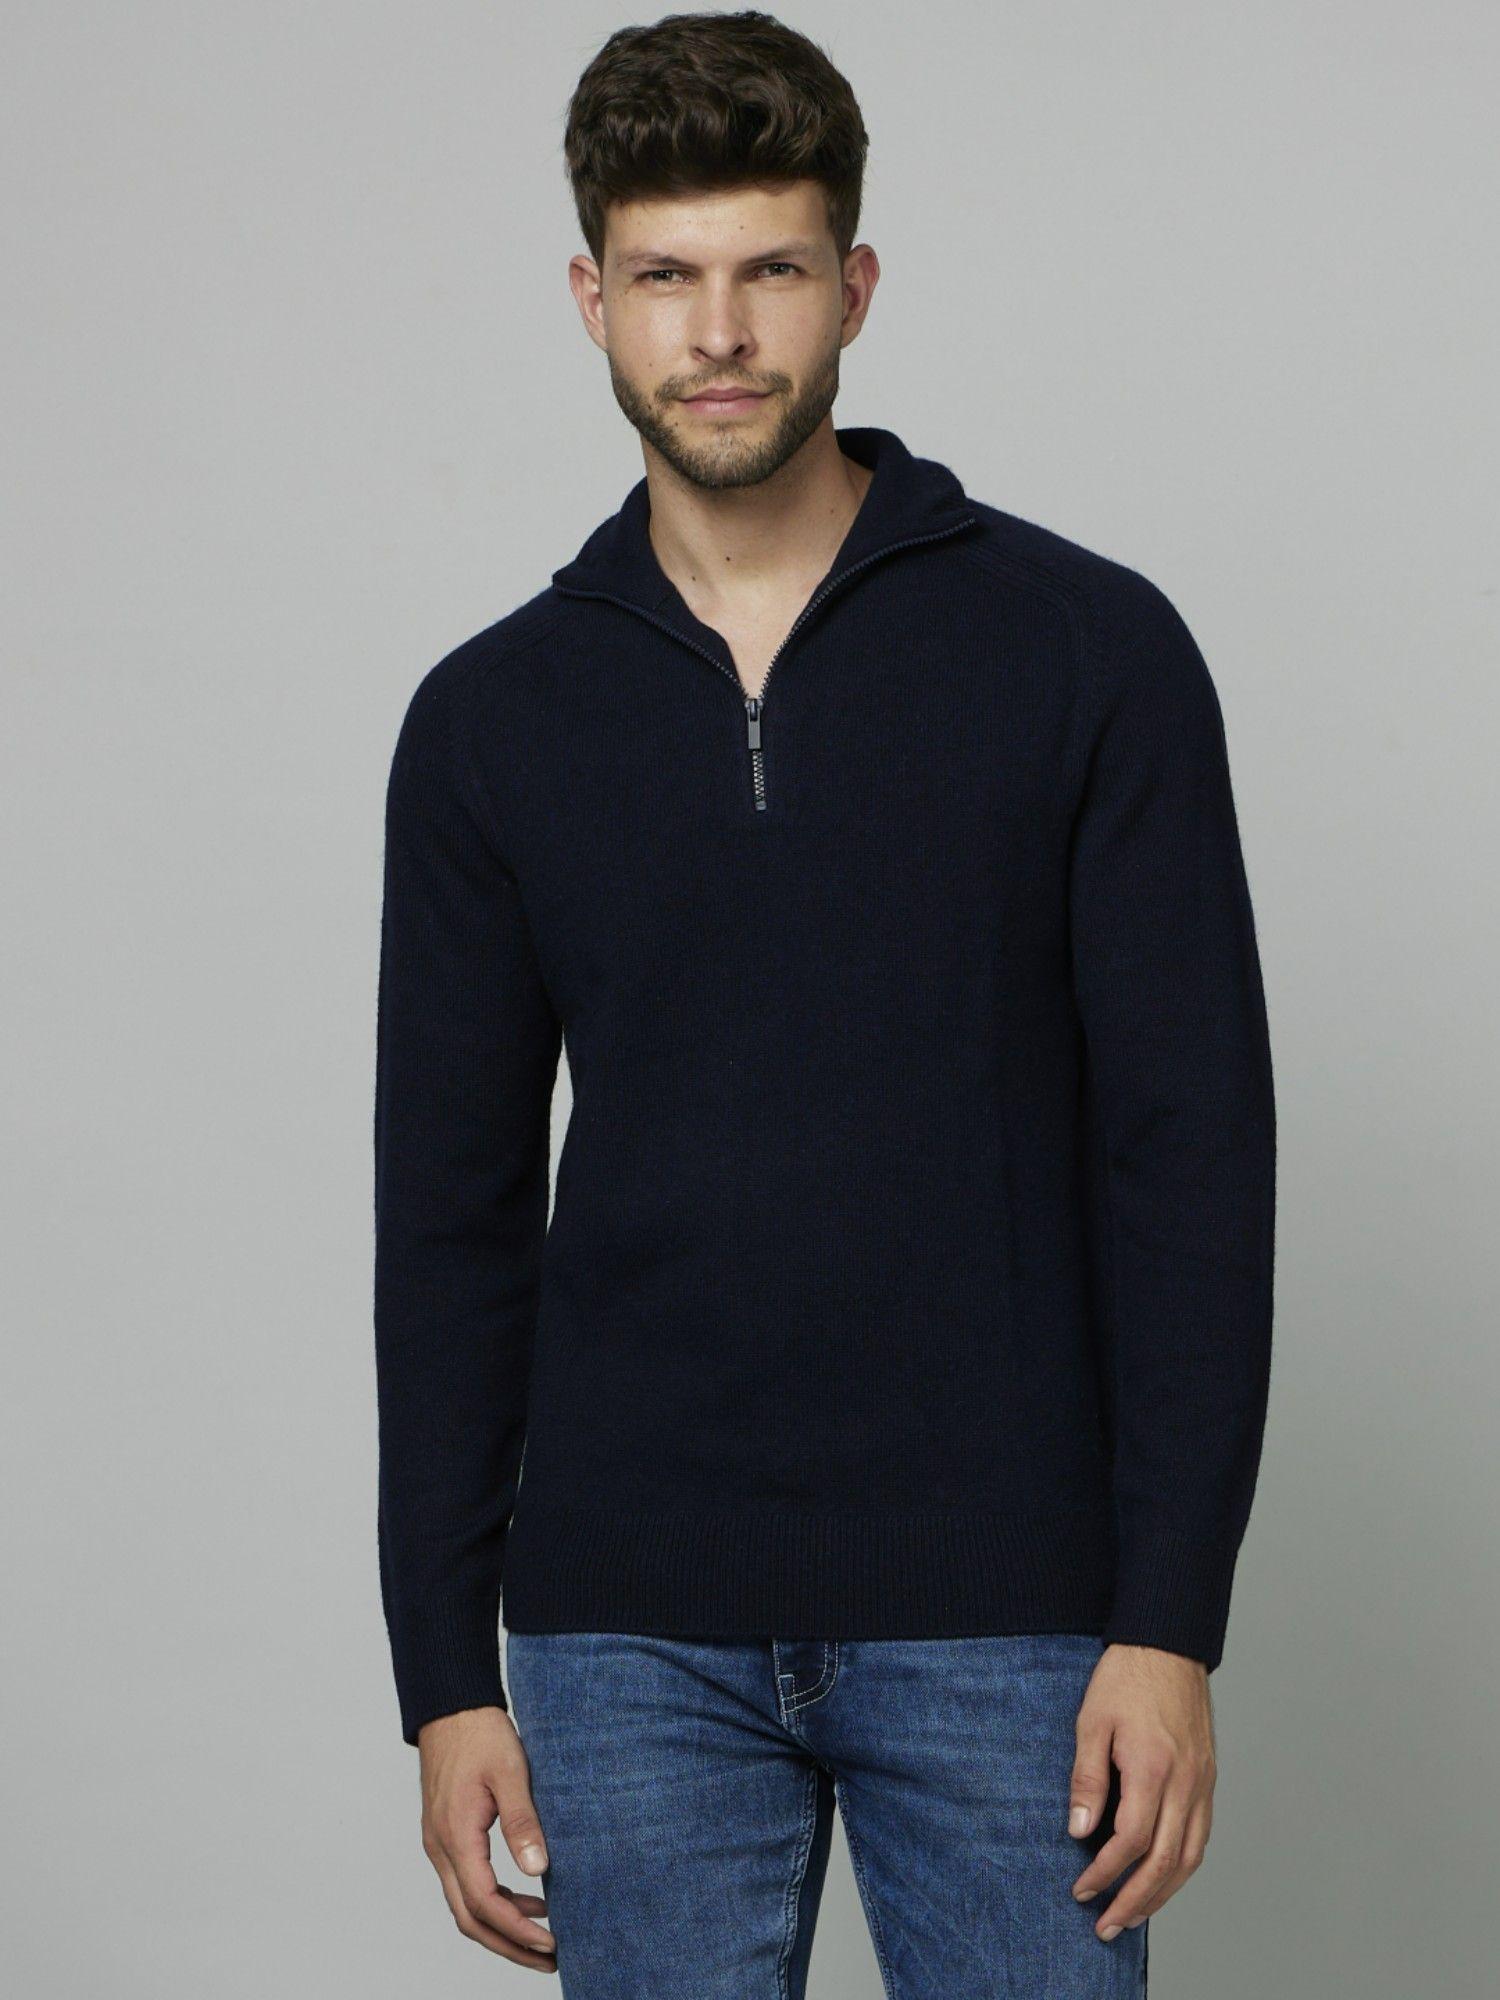 basic-solid-navy-blue-long-sleeves-sweater